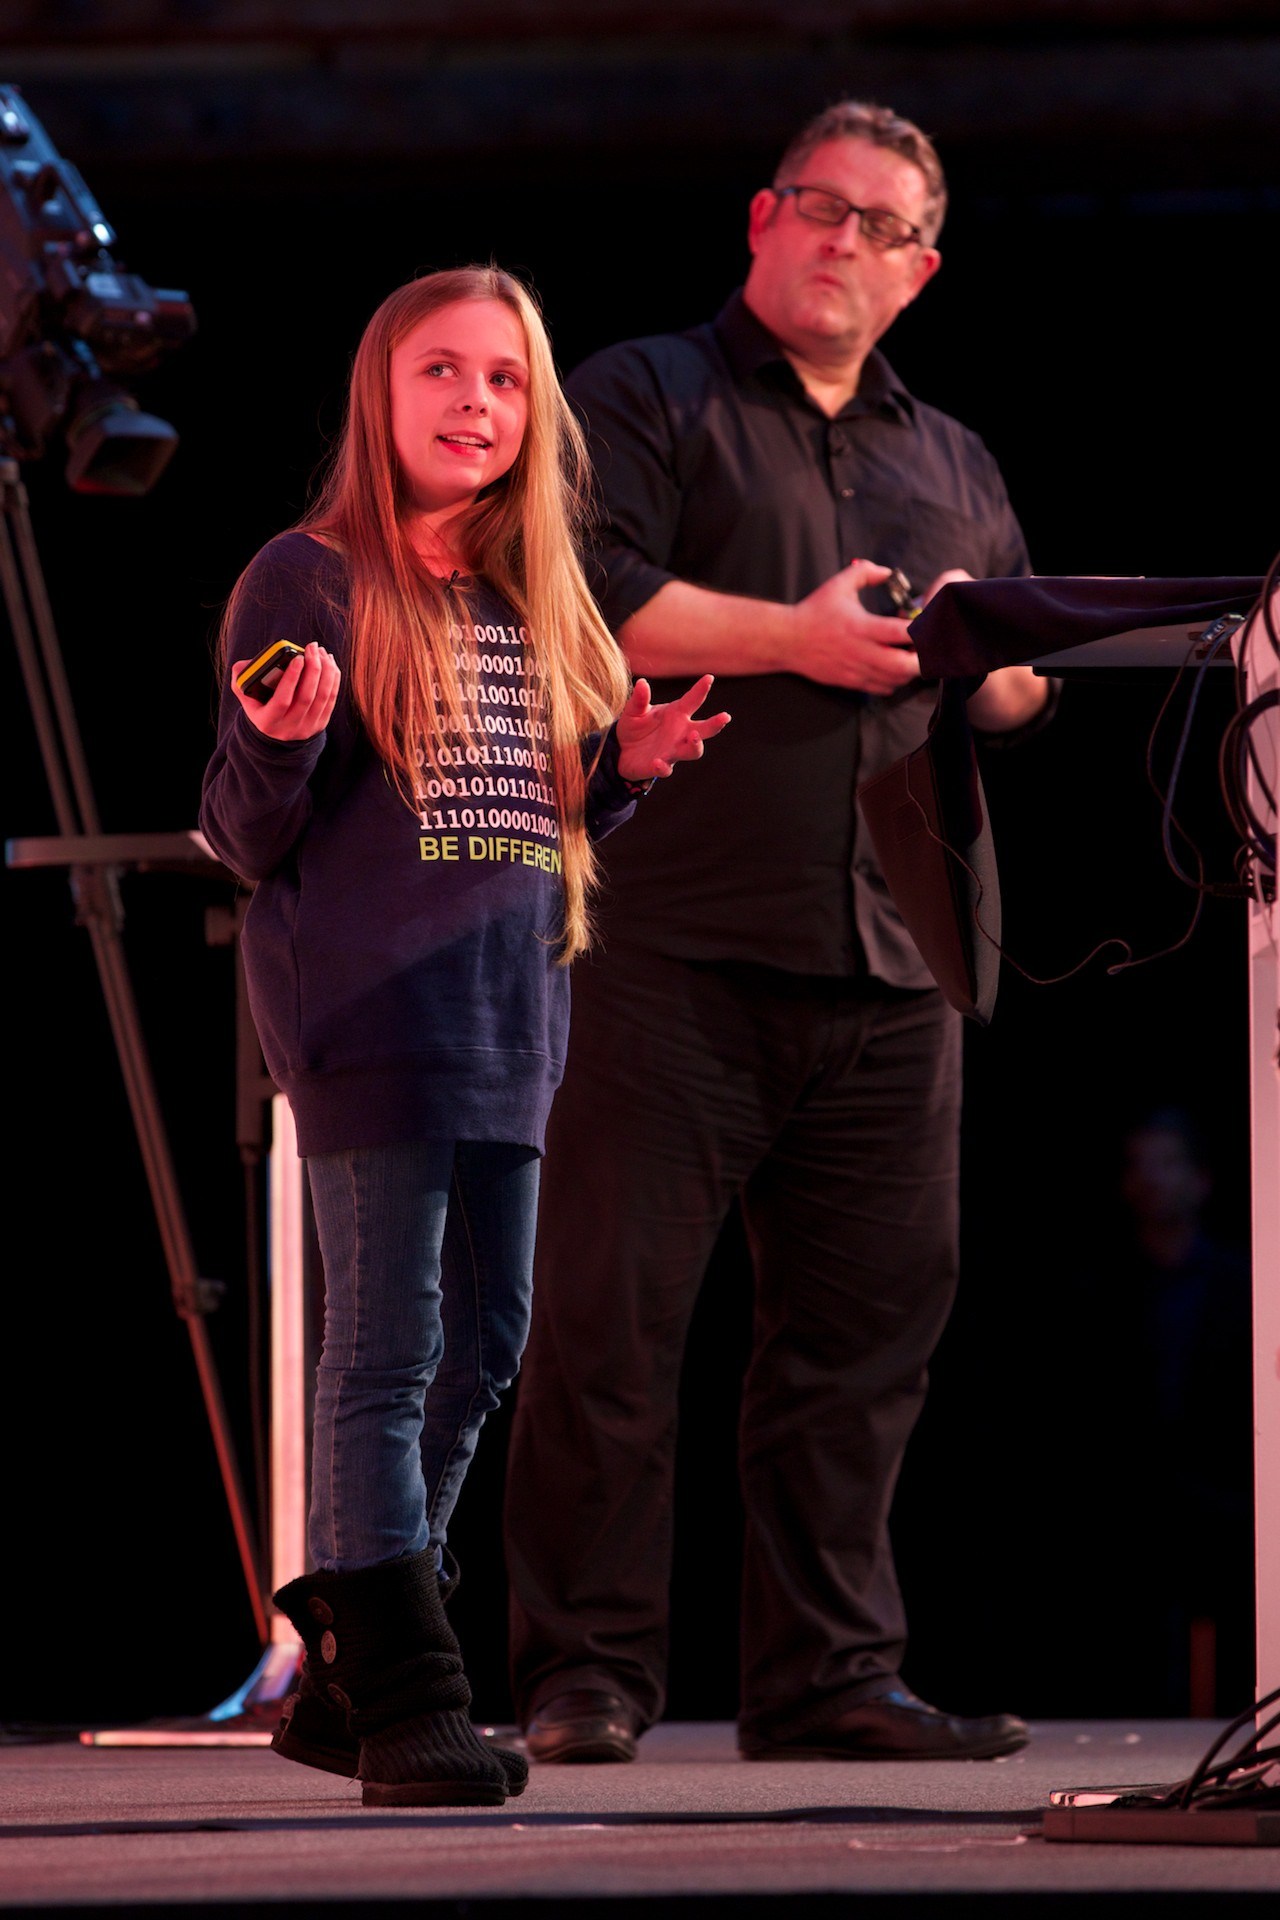 13-year-old Amy Mather on how she started coding with the Raspberry Pi | Wired Next Generation 2013 video Wired UK